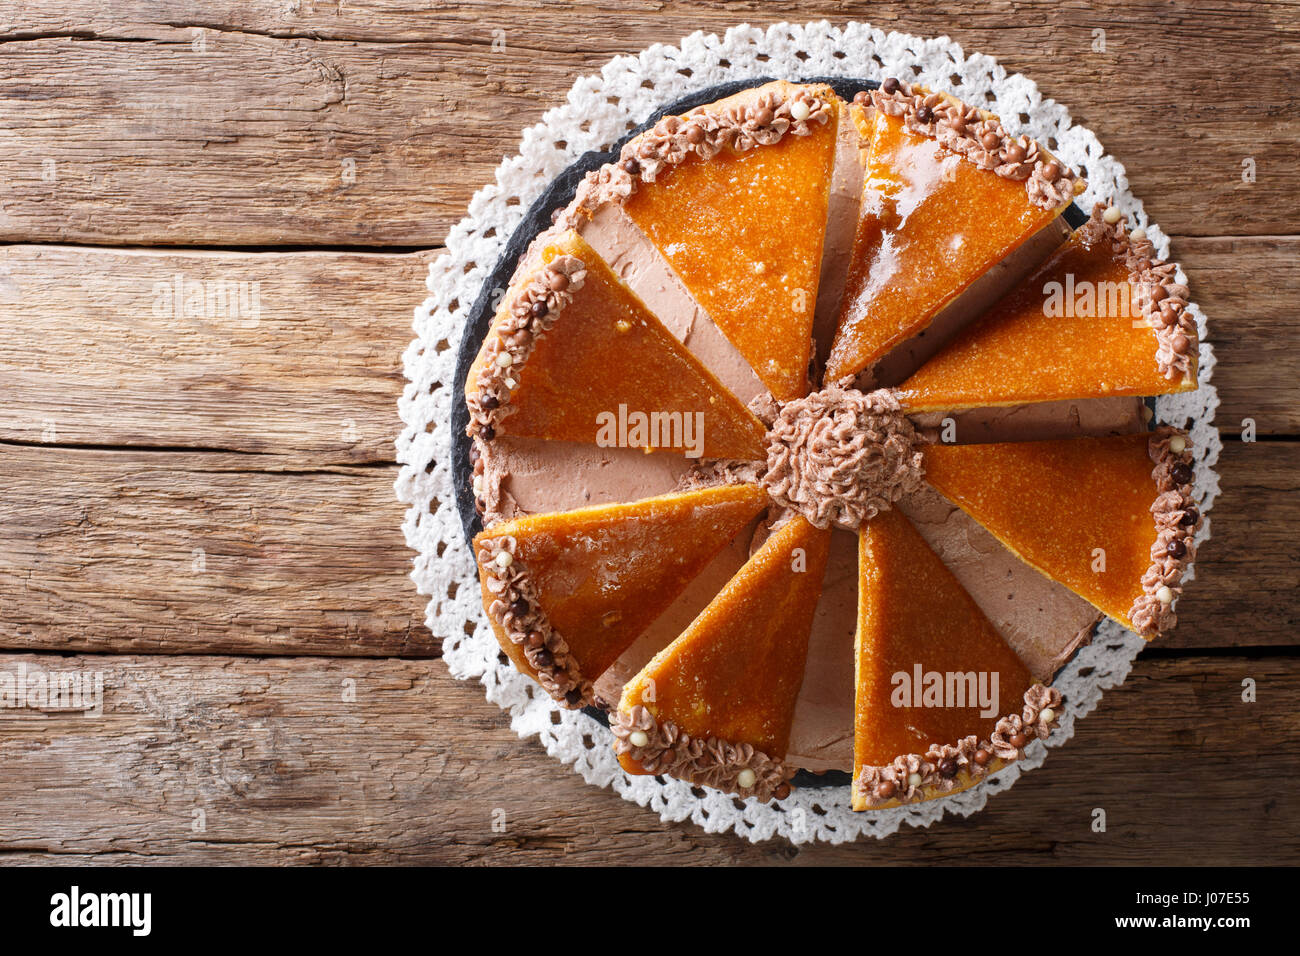 Tasty Hungarian Dobosh torte with caramel decoration close-up on a plate. horizontal view from above Stock Photo